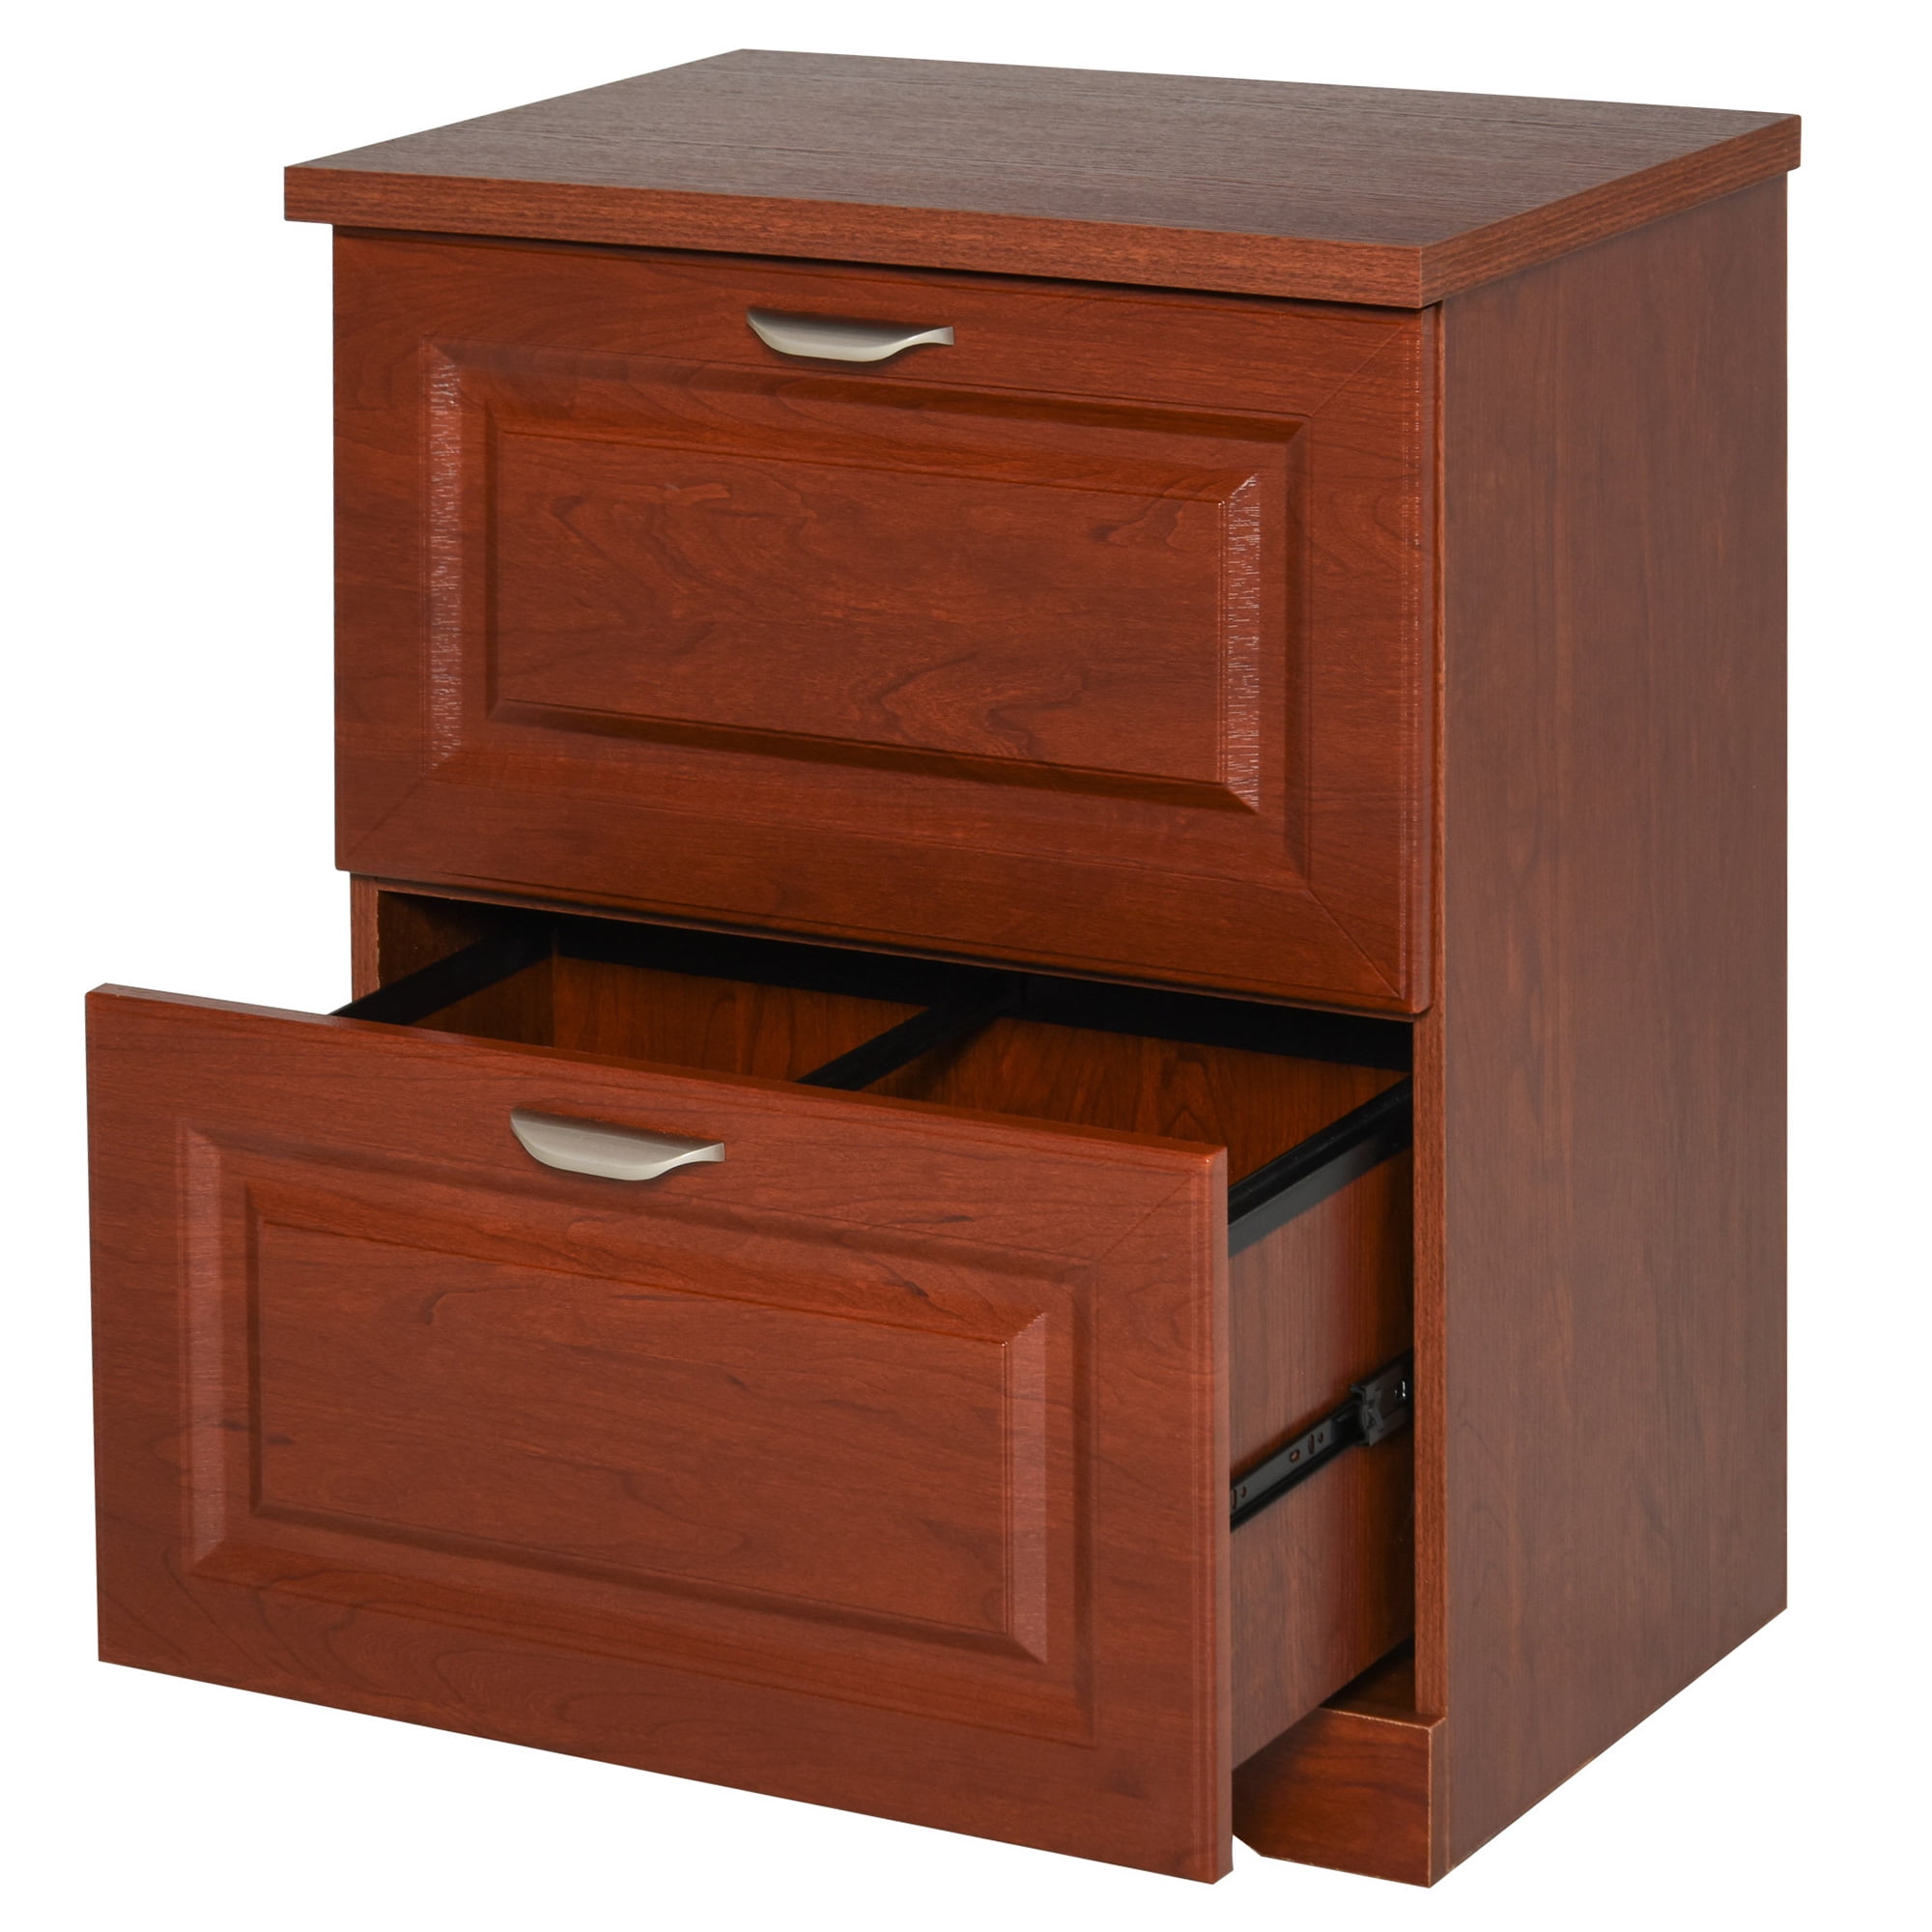 Wood Lateral File Cabinet 2 Drawer Filing Cabinets Home Office File Organizer 